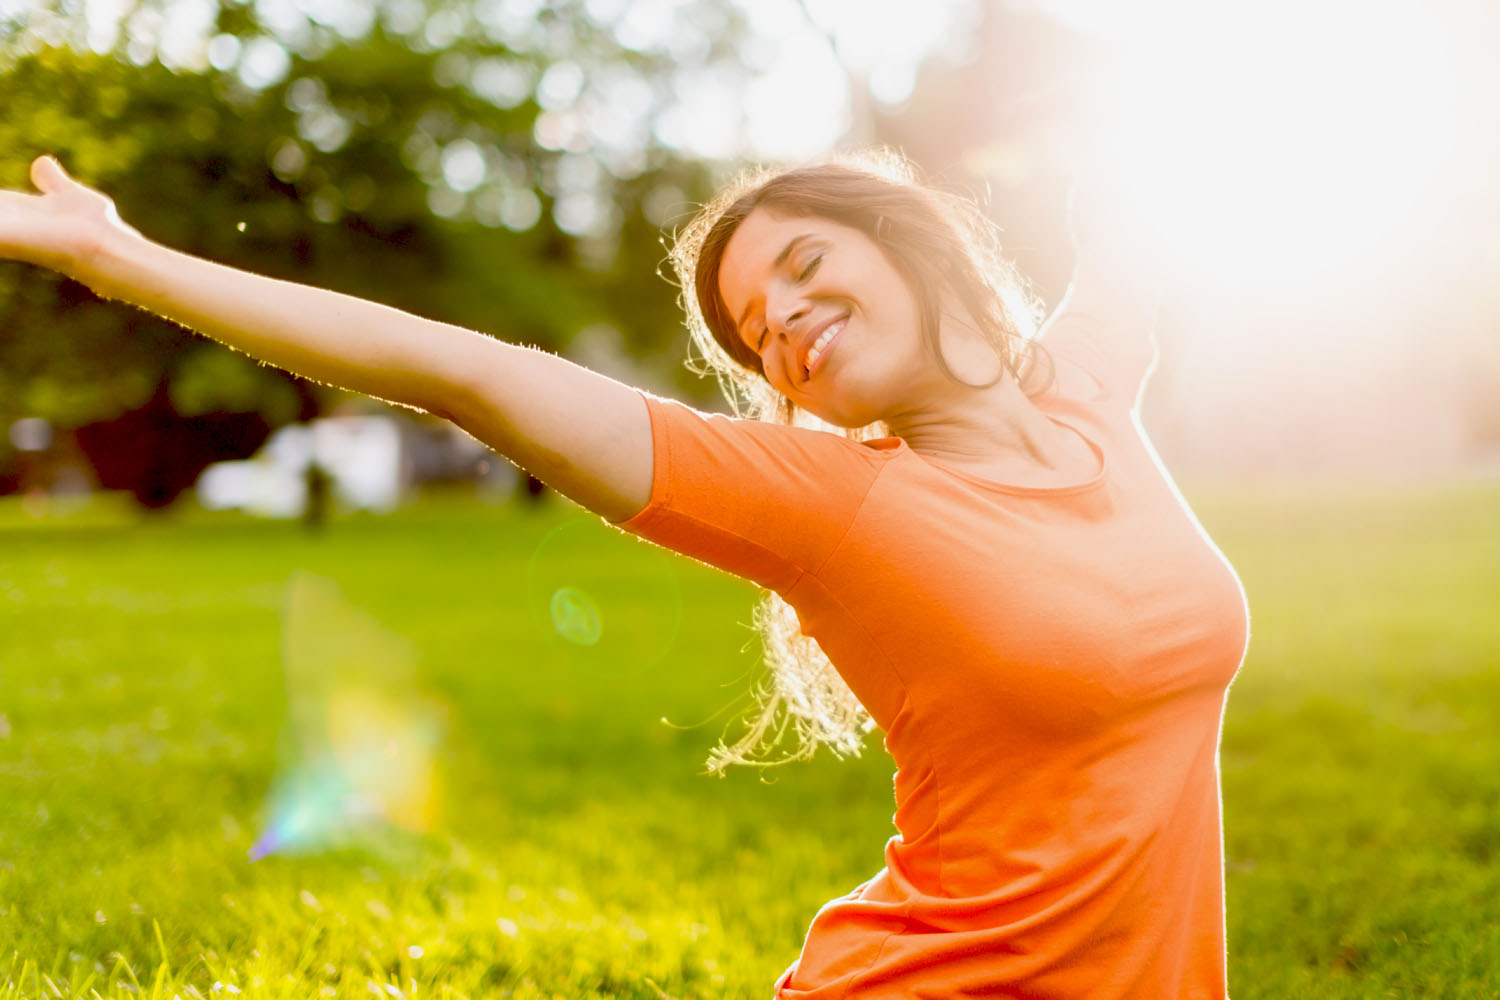 Women's health photo with happy woman in sunlight